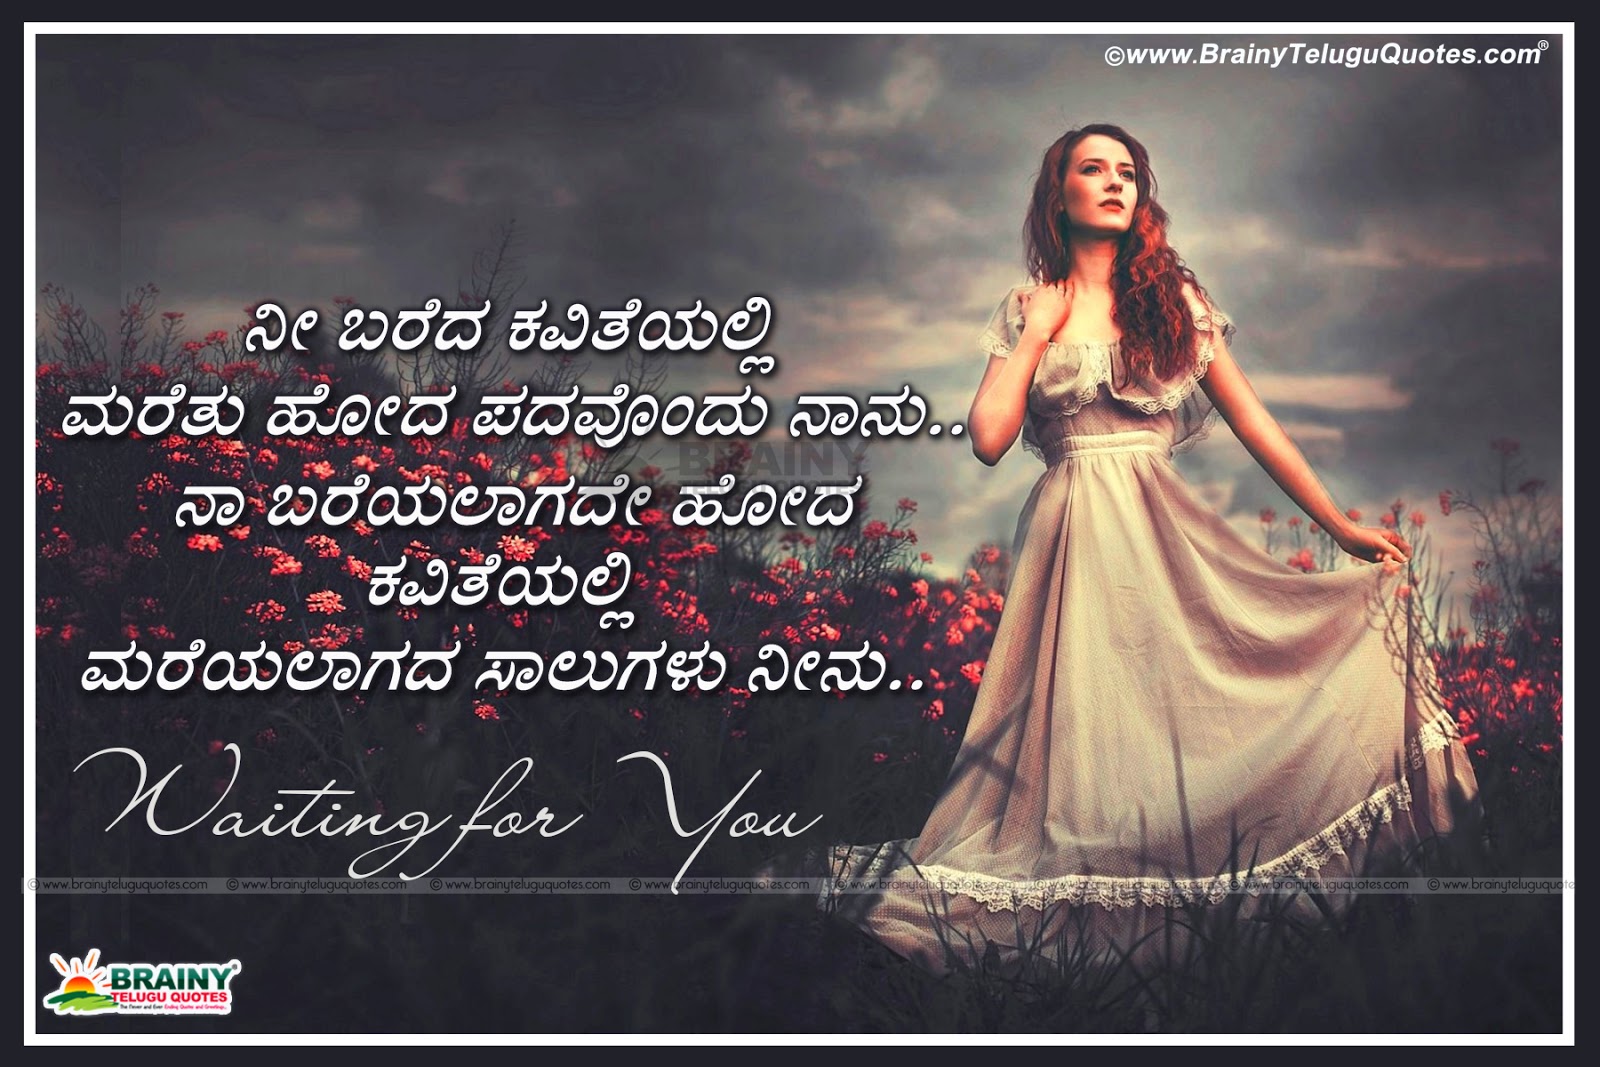 Sad Alone Girl With Heart Touching Love Quotes Kavanagalu In